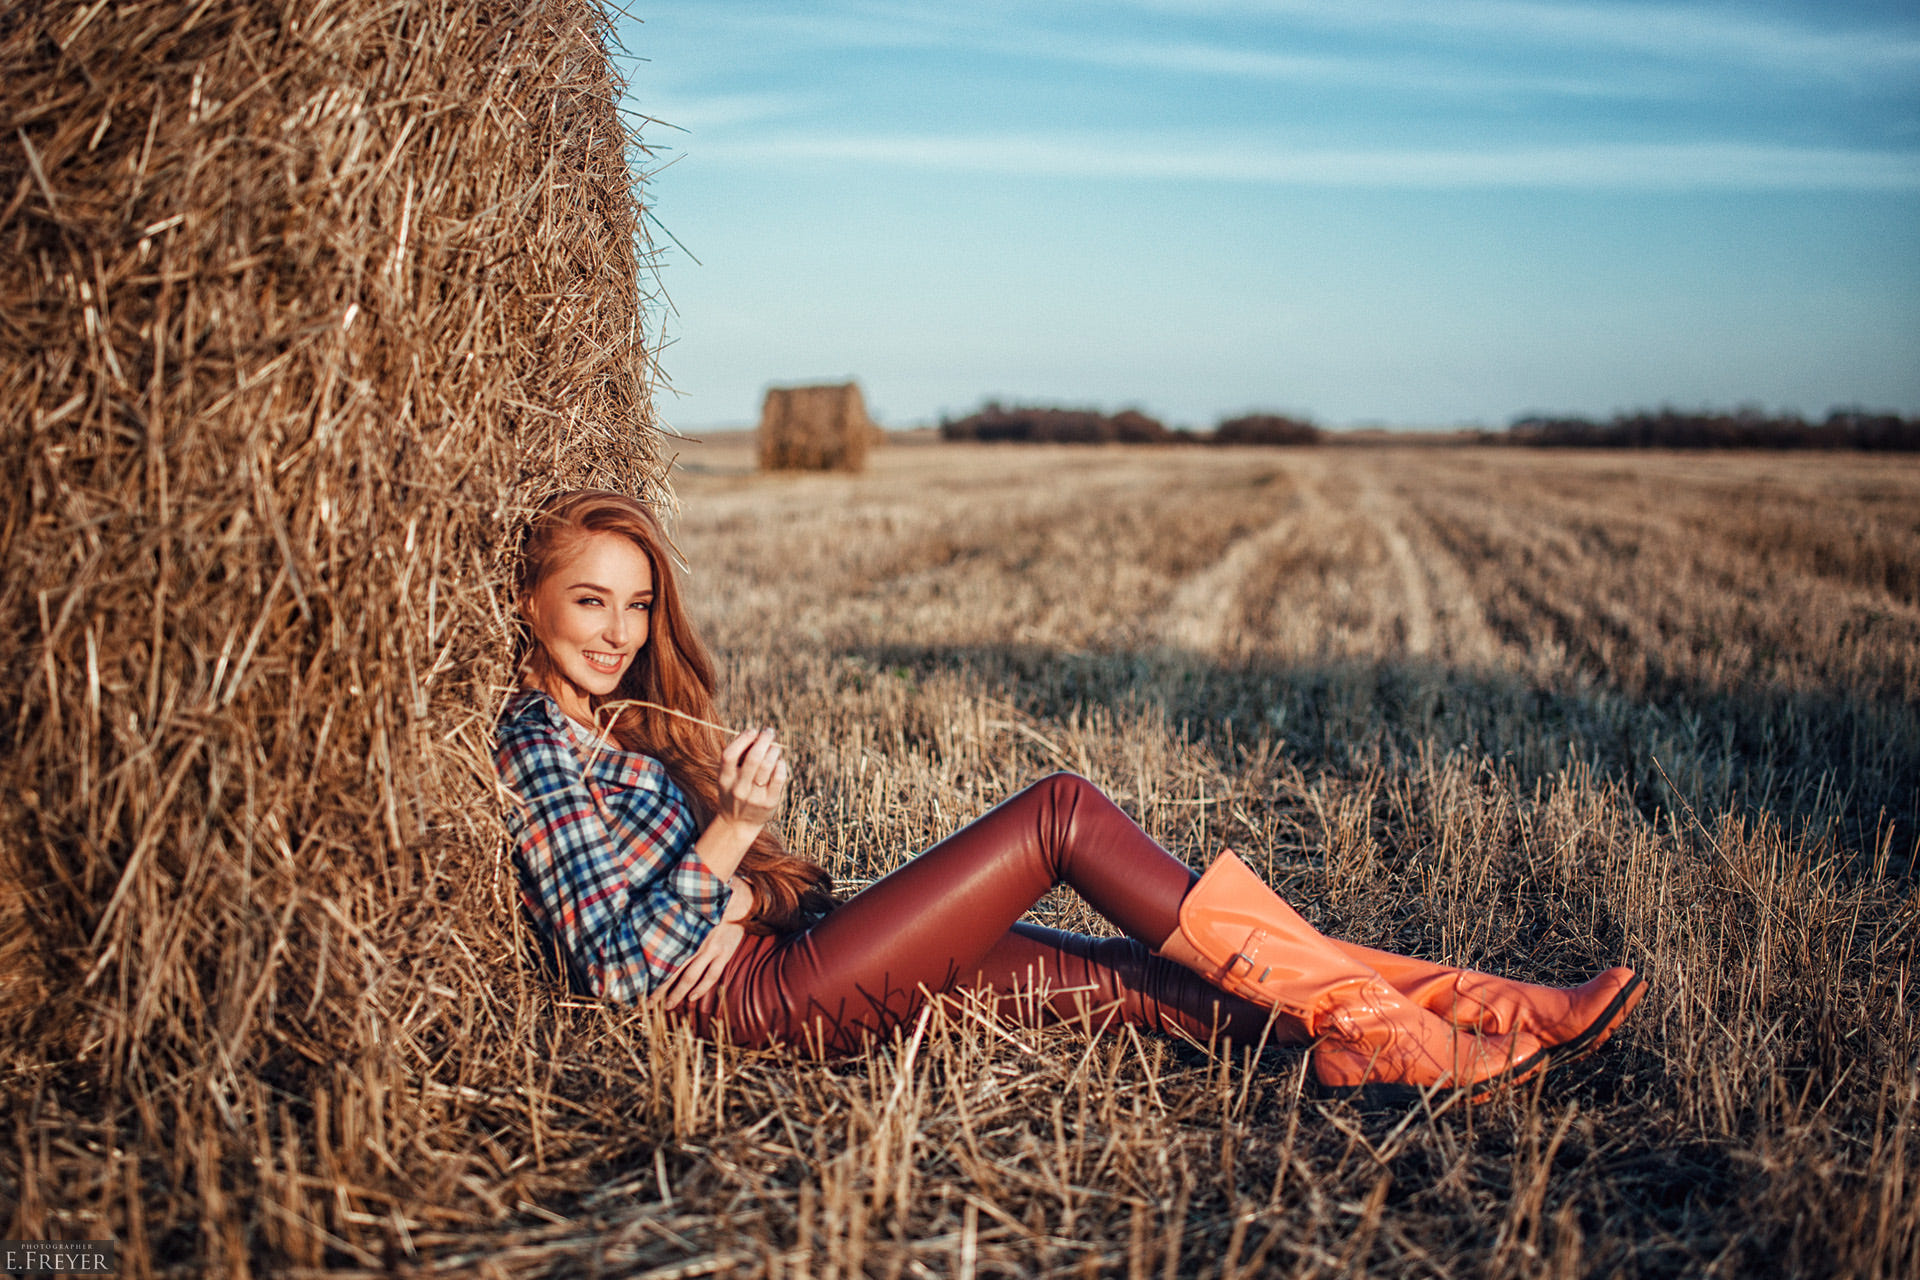 People 1920x1280 women redhead hay women outdoors leather pants  boots shirt haystacks field Evgeny Freyer plaid shirt hay bales brown pants tight pants watermarked